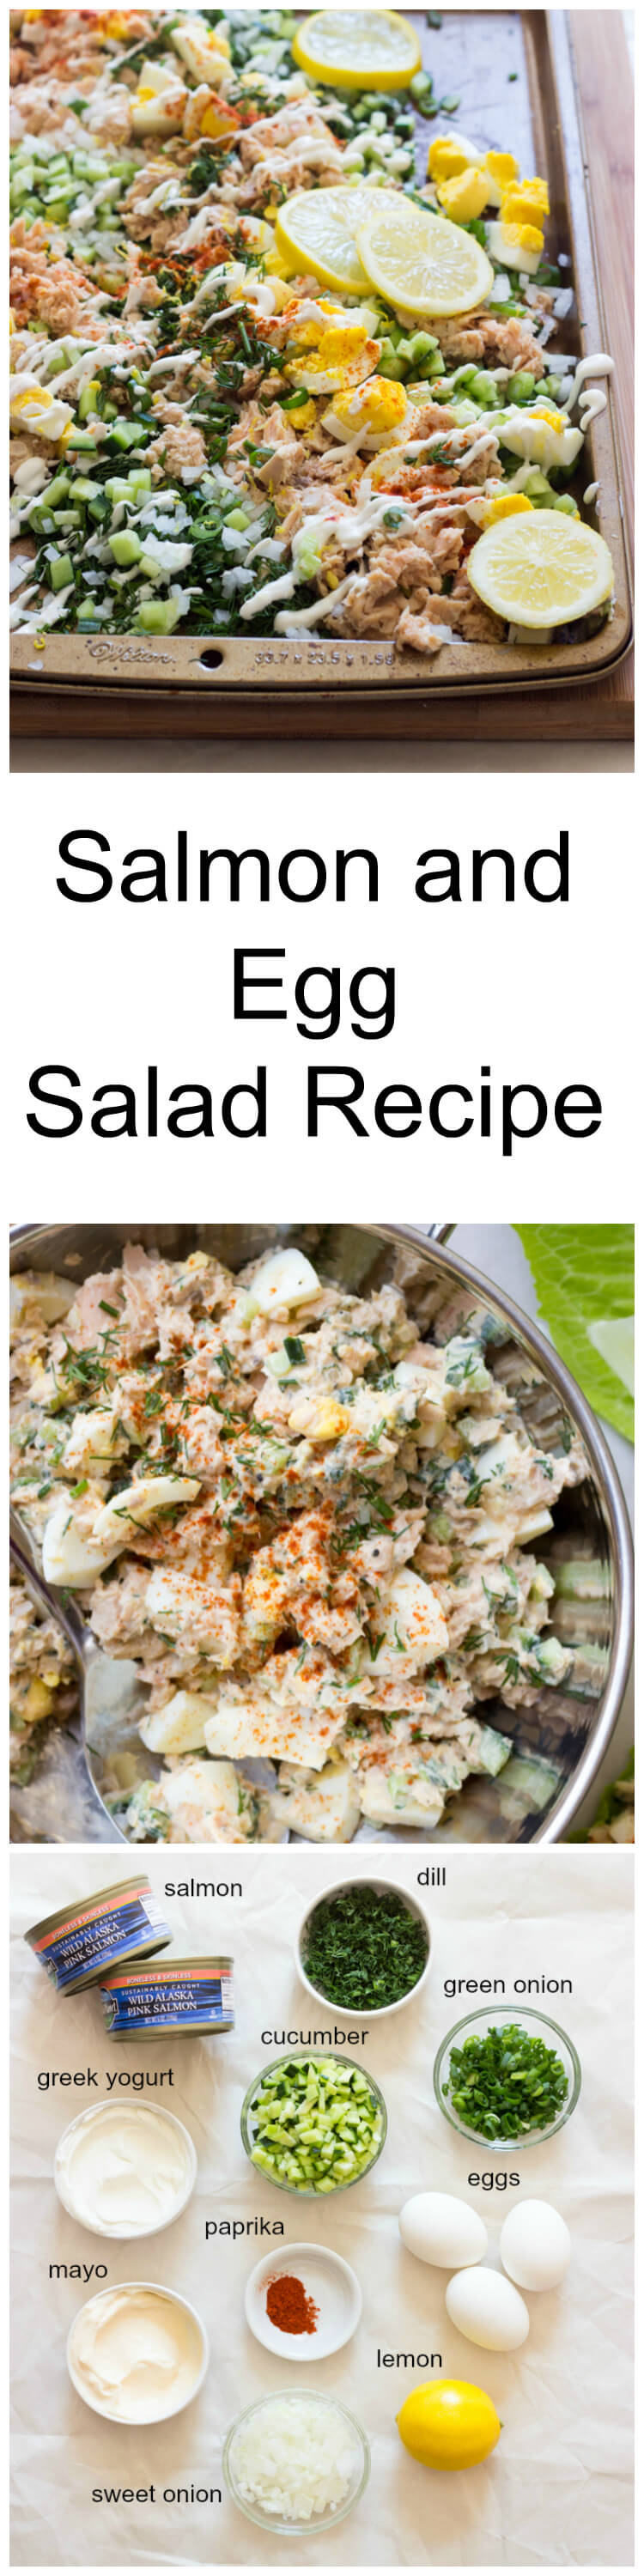 Salmon and Egg Salad Recipe - canned salmon and egg salad loaded with crispy veggies, herbs, and tossed with greek yogurt dressing | littlebroken.com @littlebroken